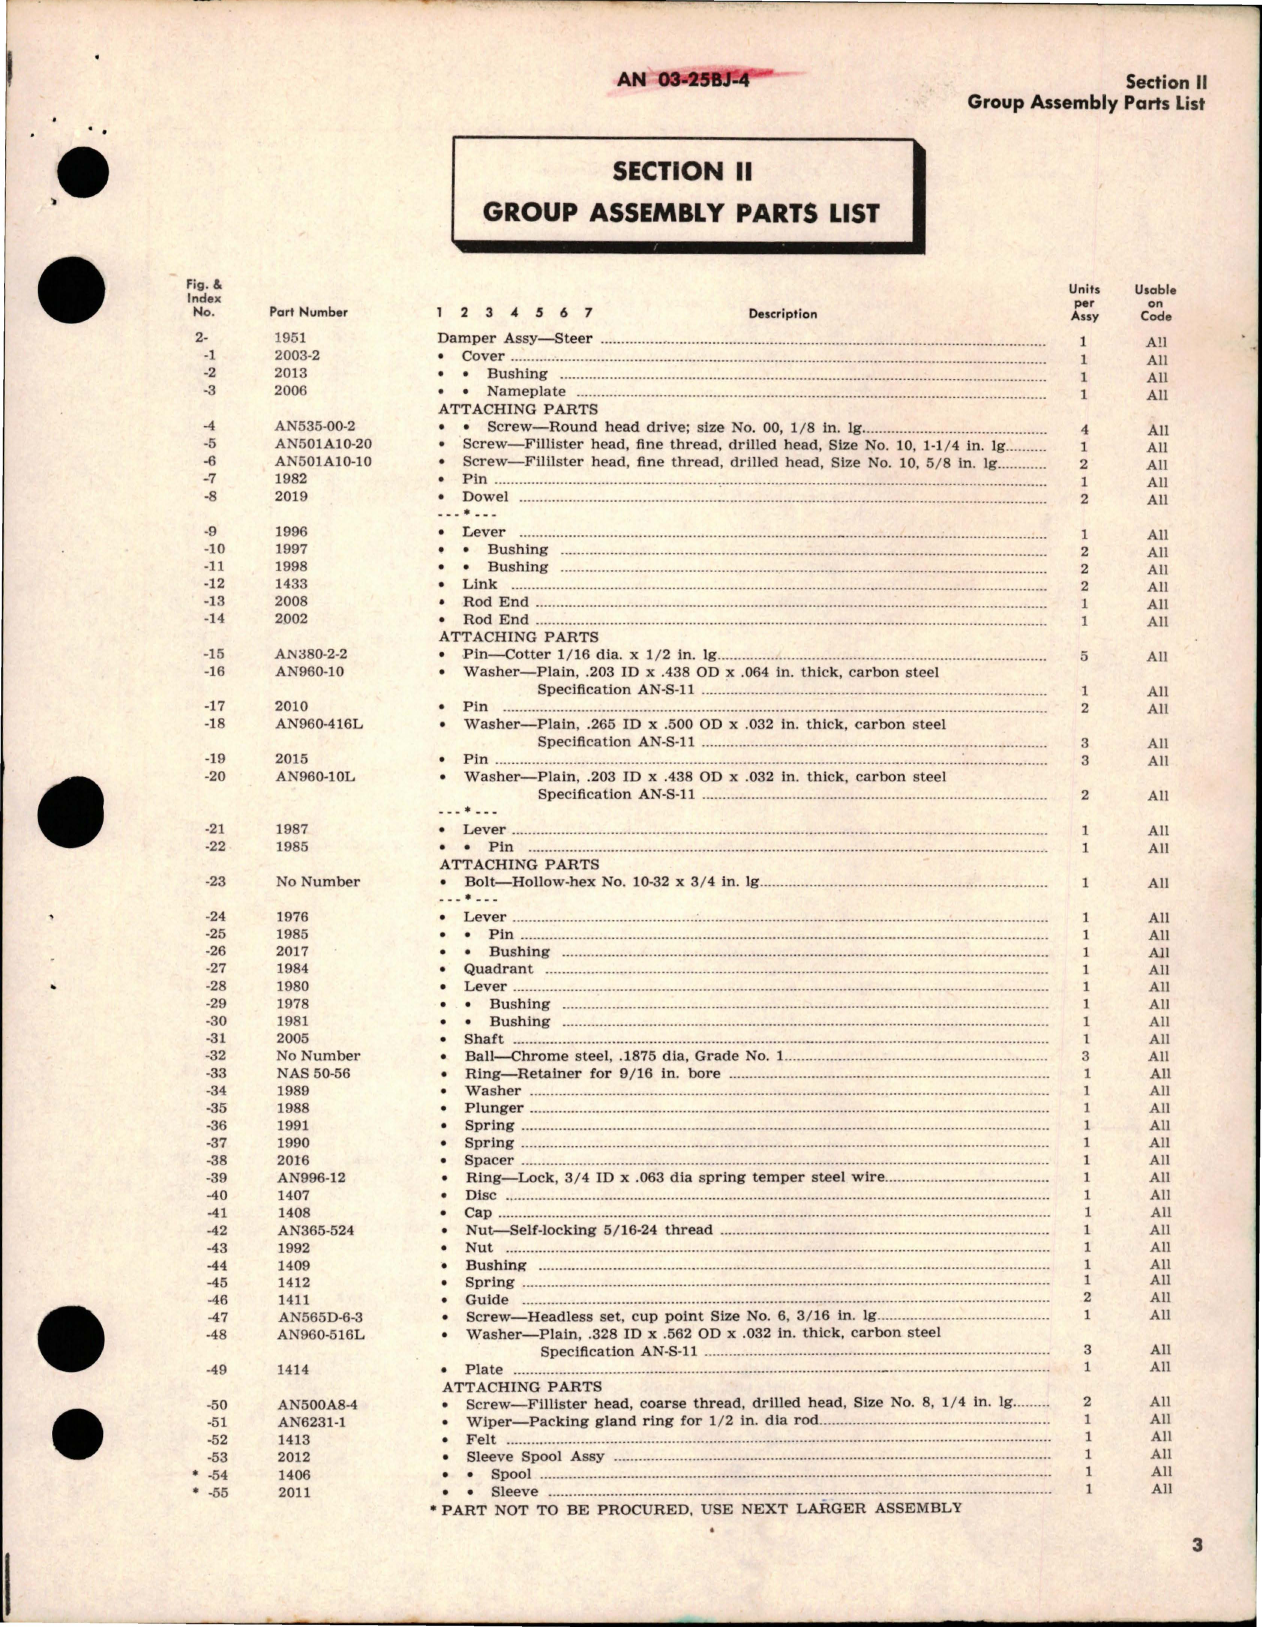 Sample page 5 from AirCorps Library document: Illustrated Parts Breakdown for Steer Damper - Parts 1951 and 2022